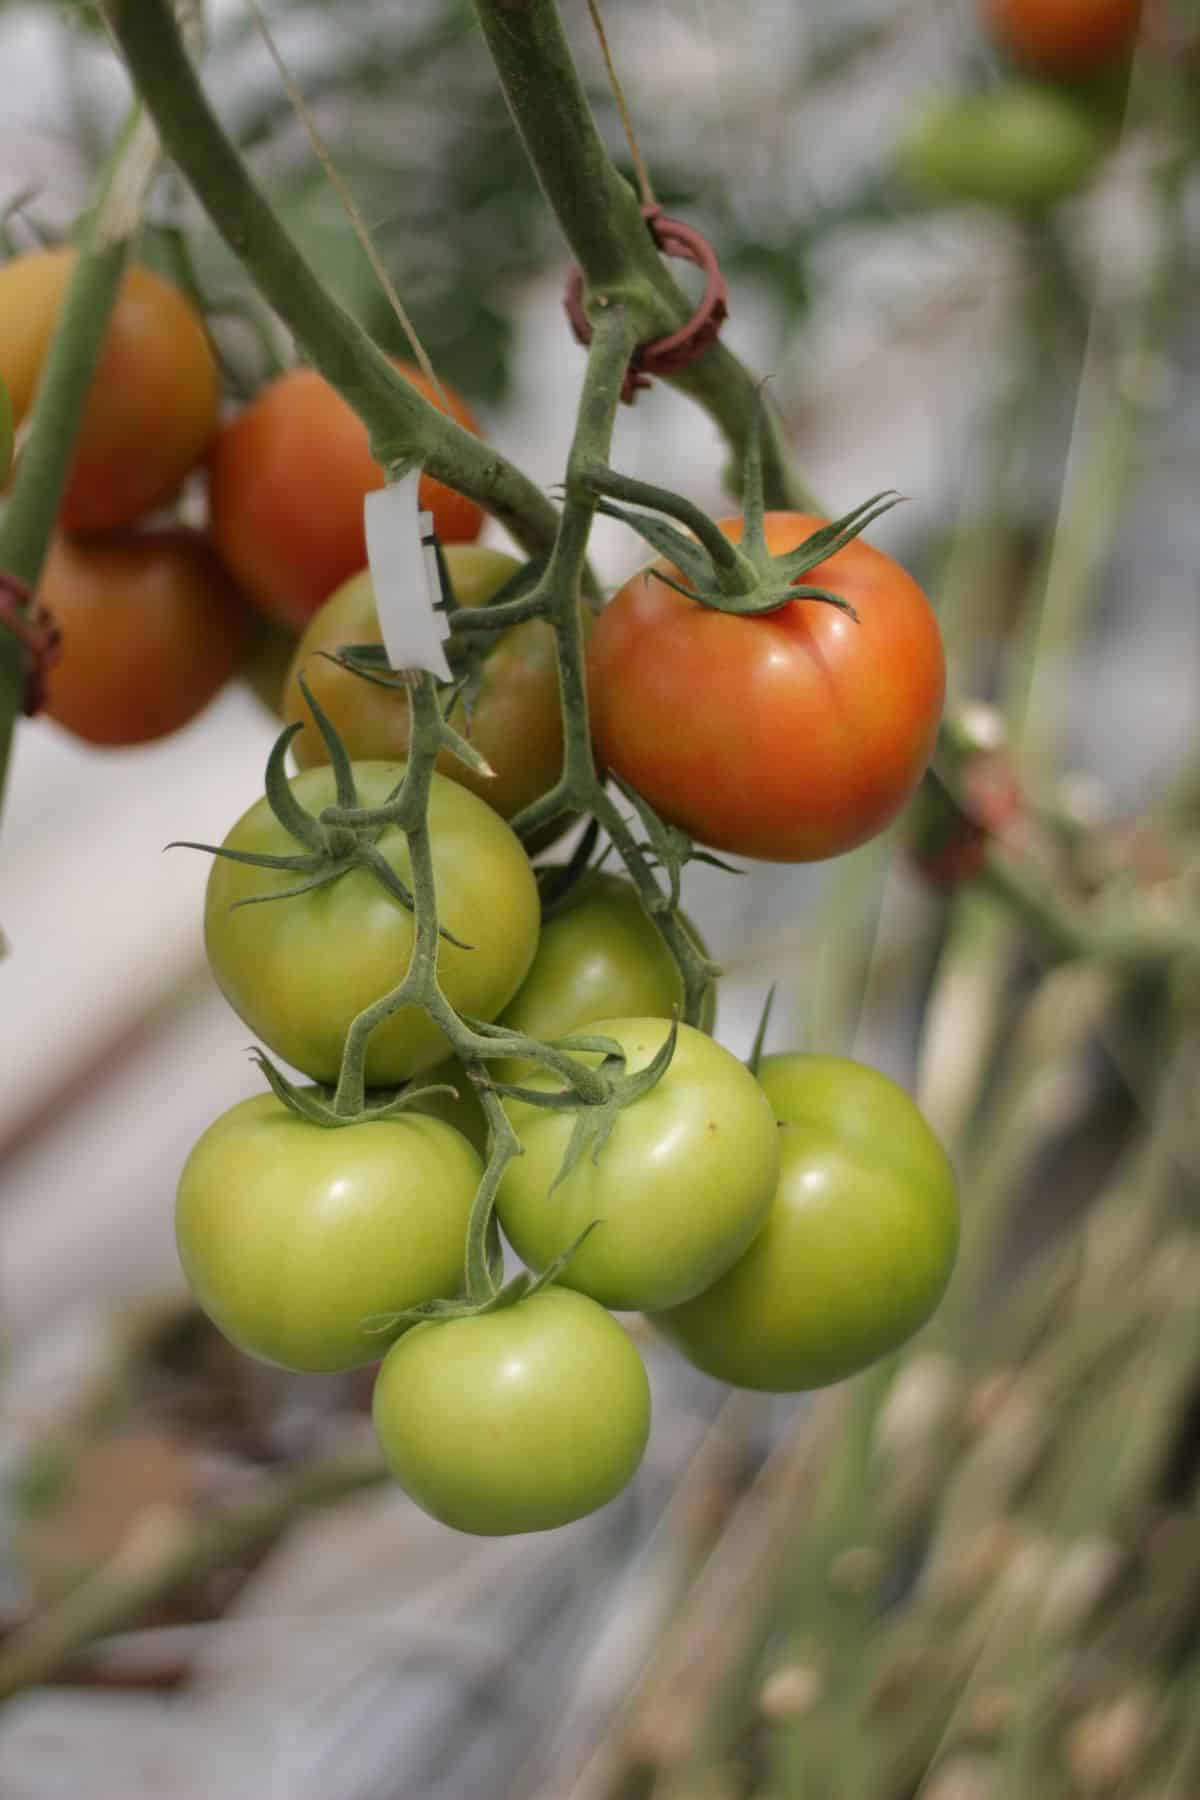 A bunch of tomatoes growing on the vine.